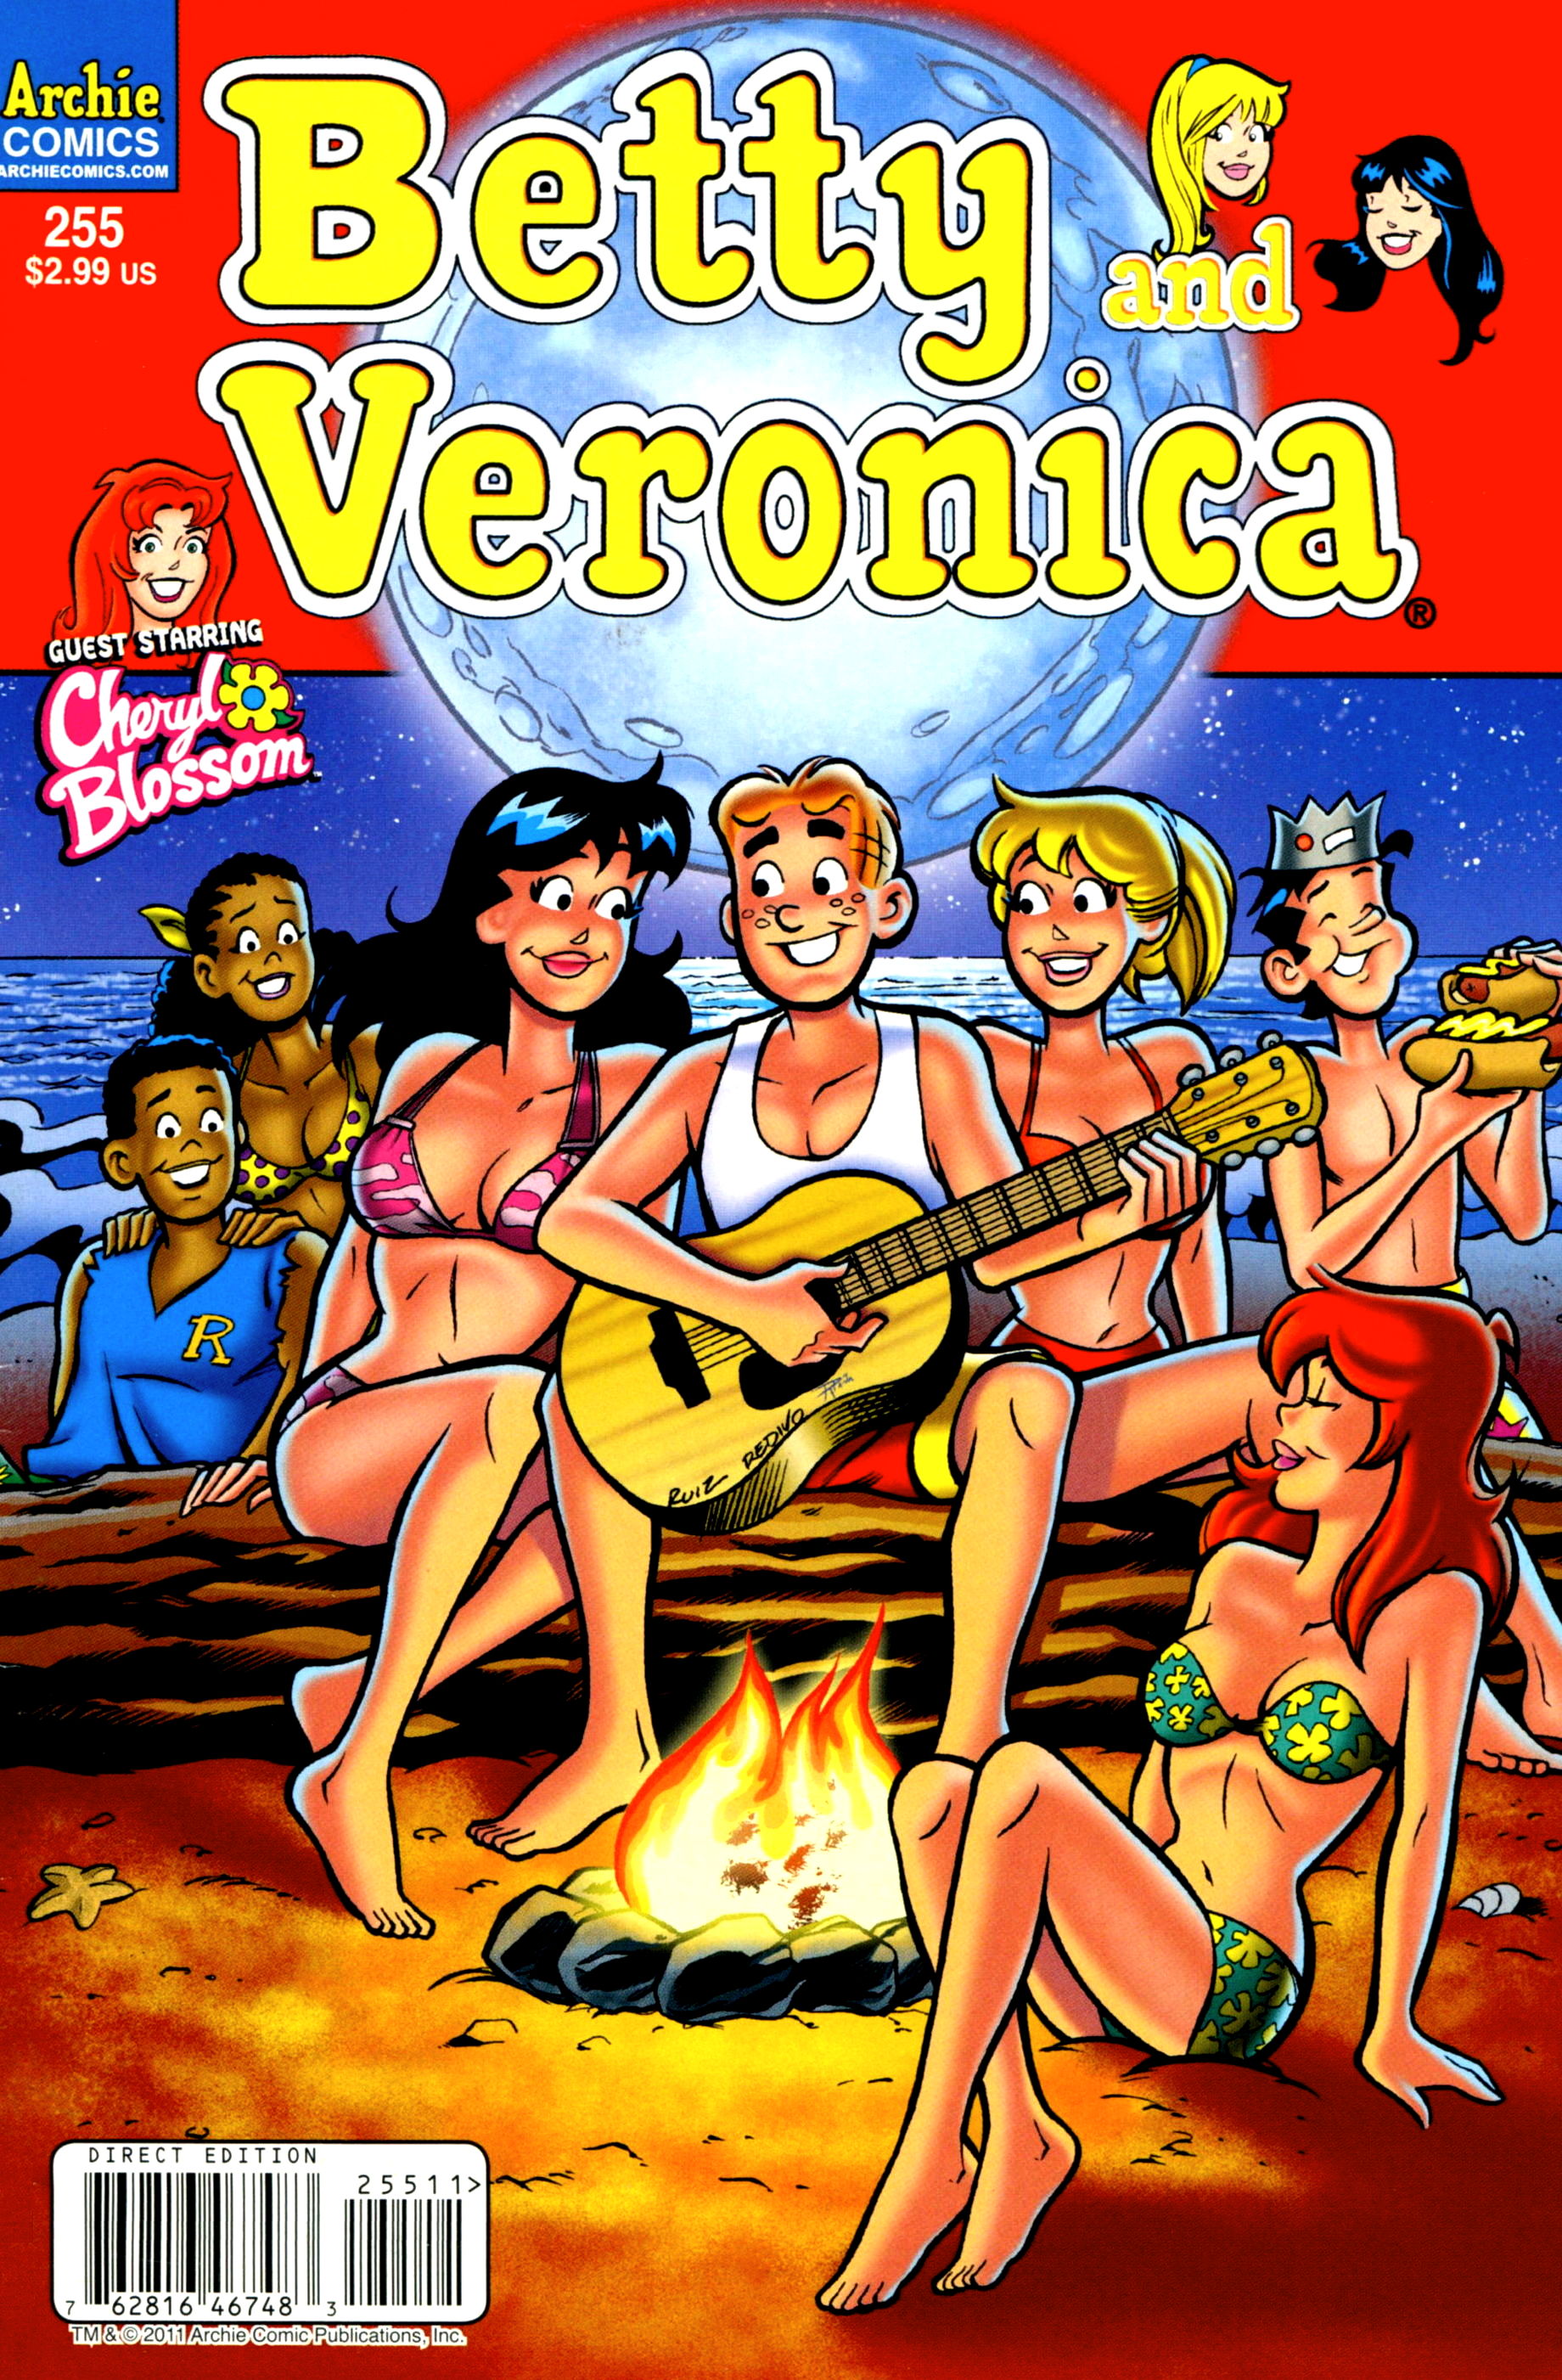 Betty And Veronica Issue 255 | Read Betty And Veronica Issue 255 comic  online in high quality. Read Full Comic online for free - Read comics  online in high quality .|viewcomiconline.com